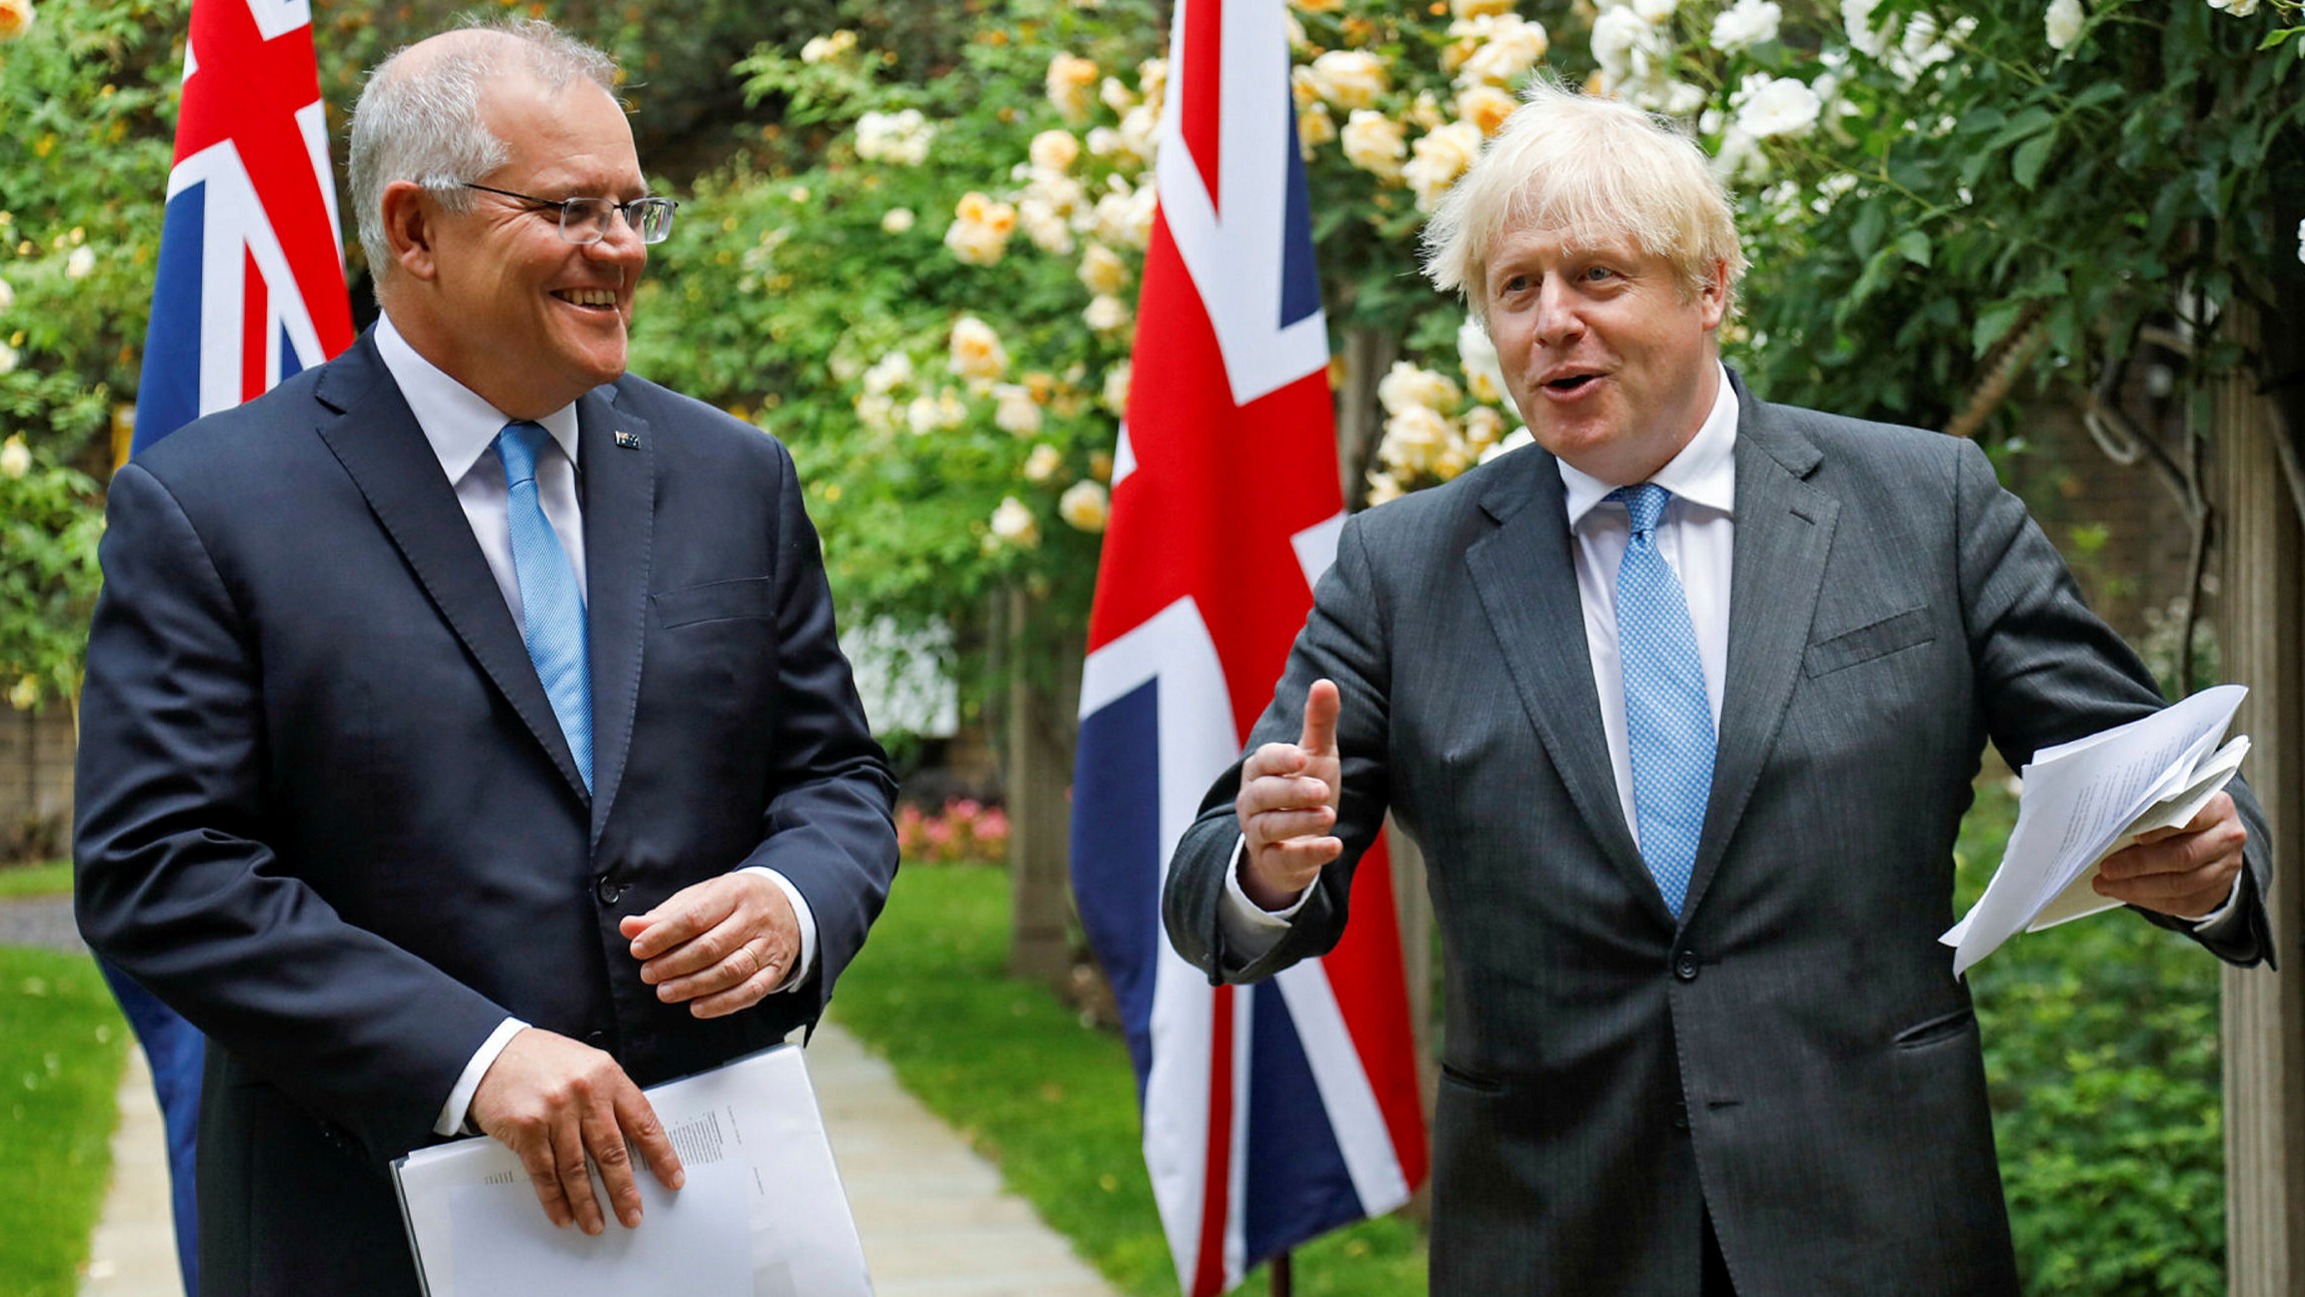 UK and Australia agree post-Brexit trade deal | Financial Times